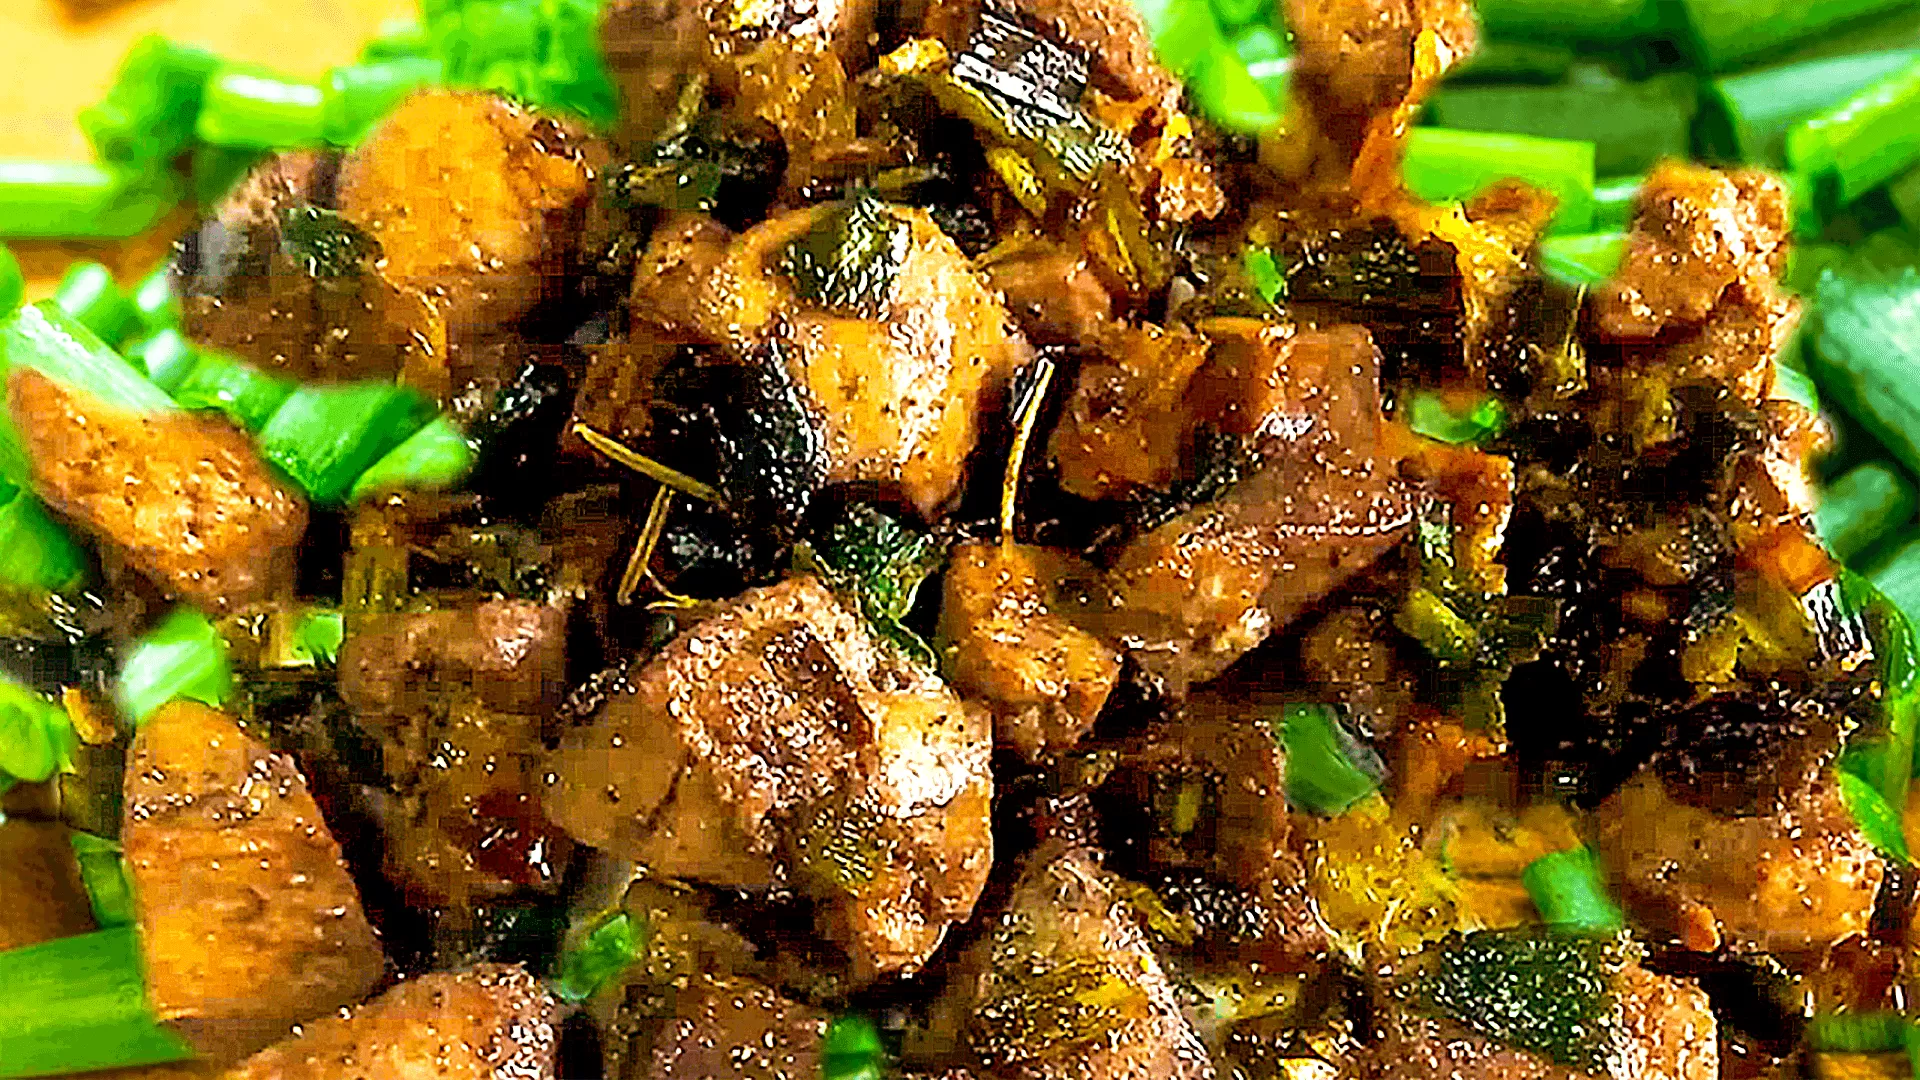 Fried Lamb Liver with Green Onions.